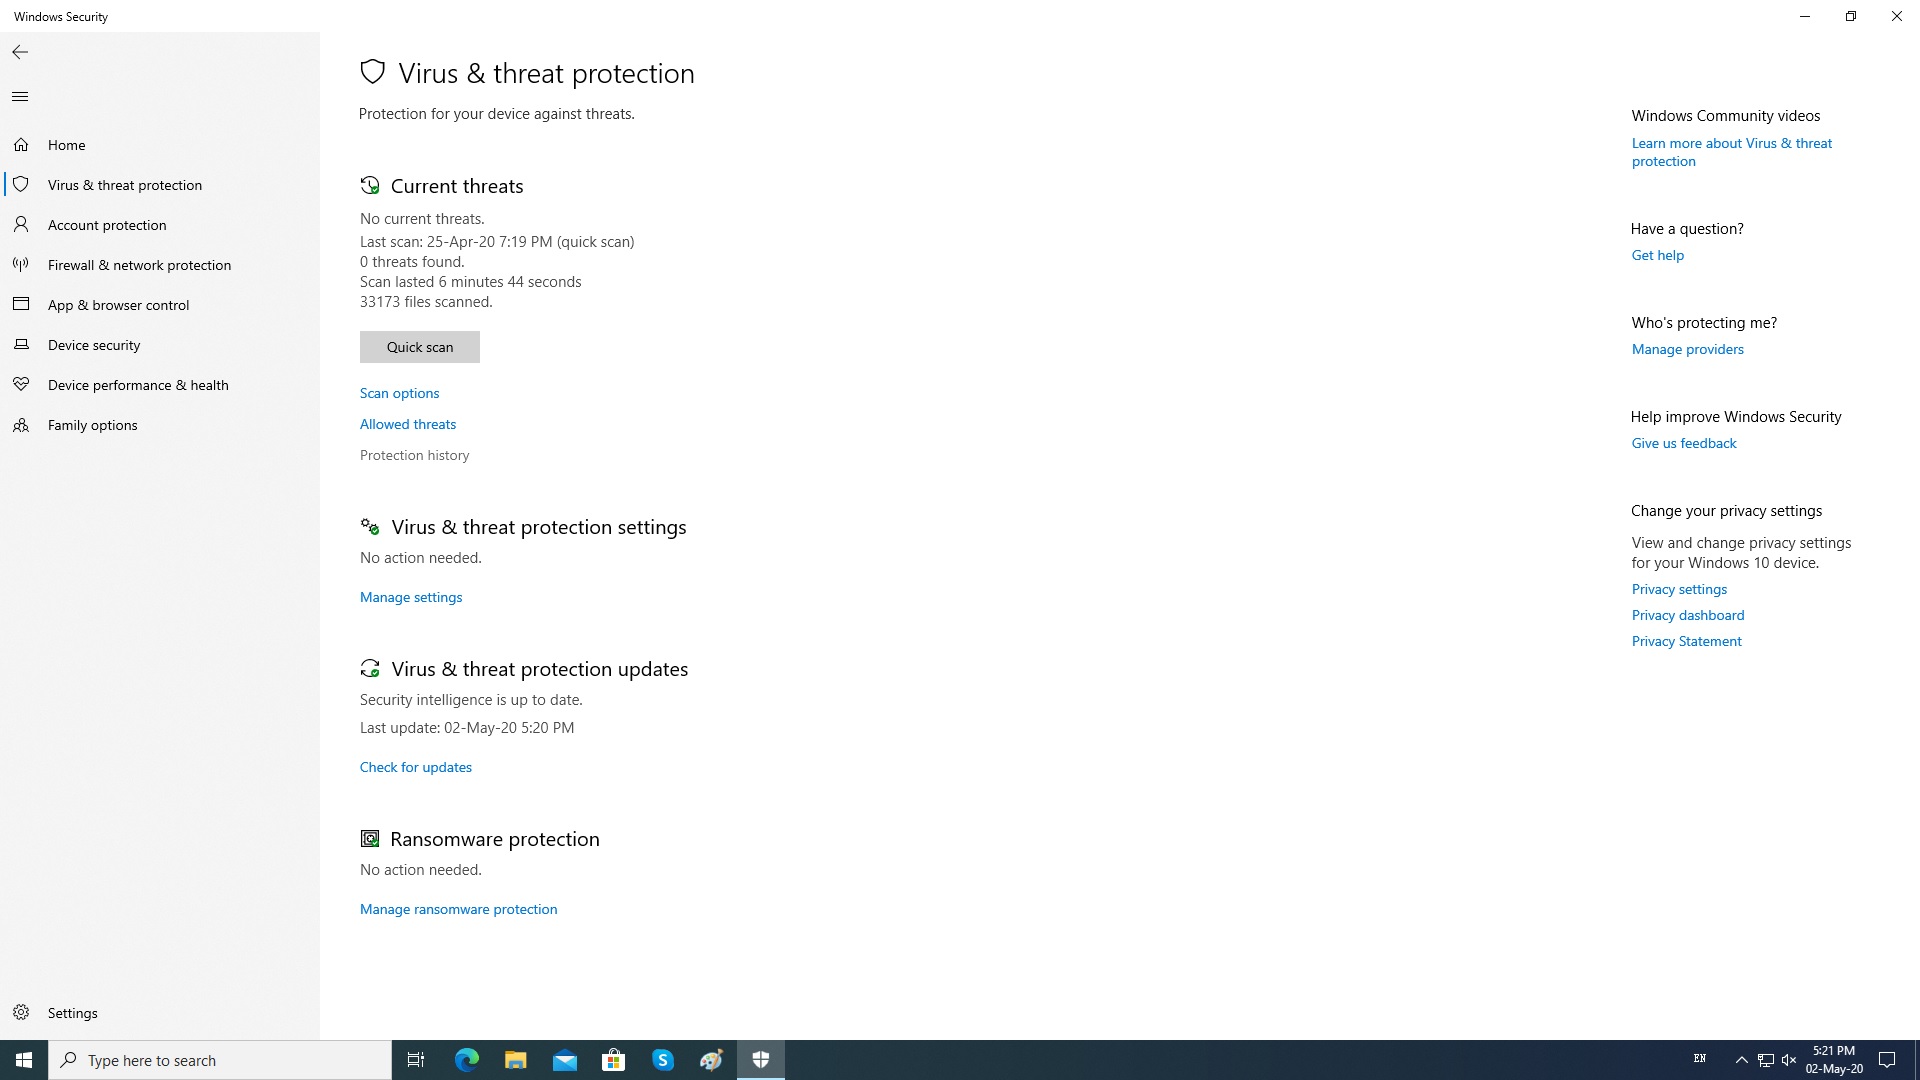 Unable to access Windows Security's protection history d3b3b3c5-cf06-4648-9941-3603286263a1?upload=true.jpg